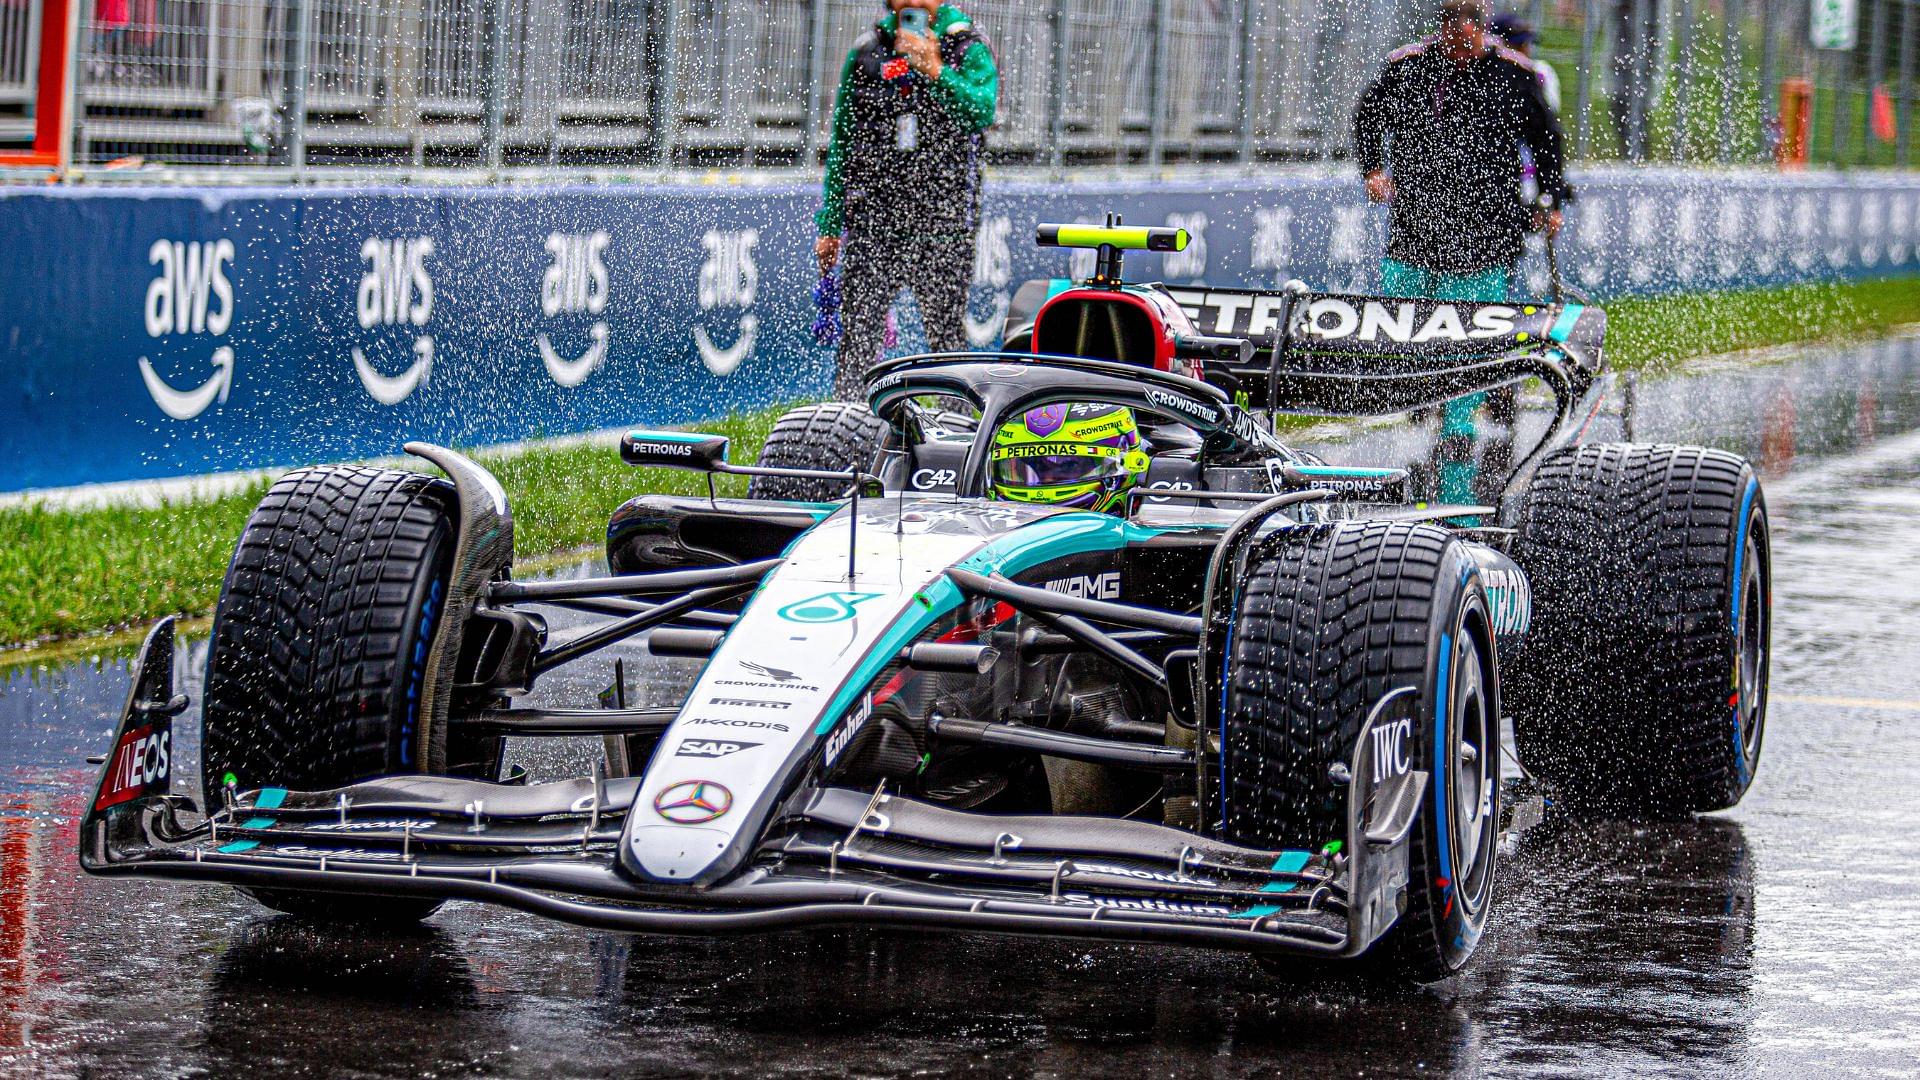 Mercedes Silently Confident About What Is to Come: “A Better Car”